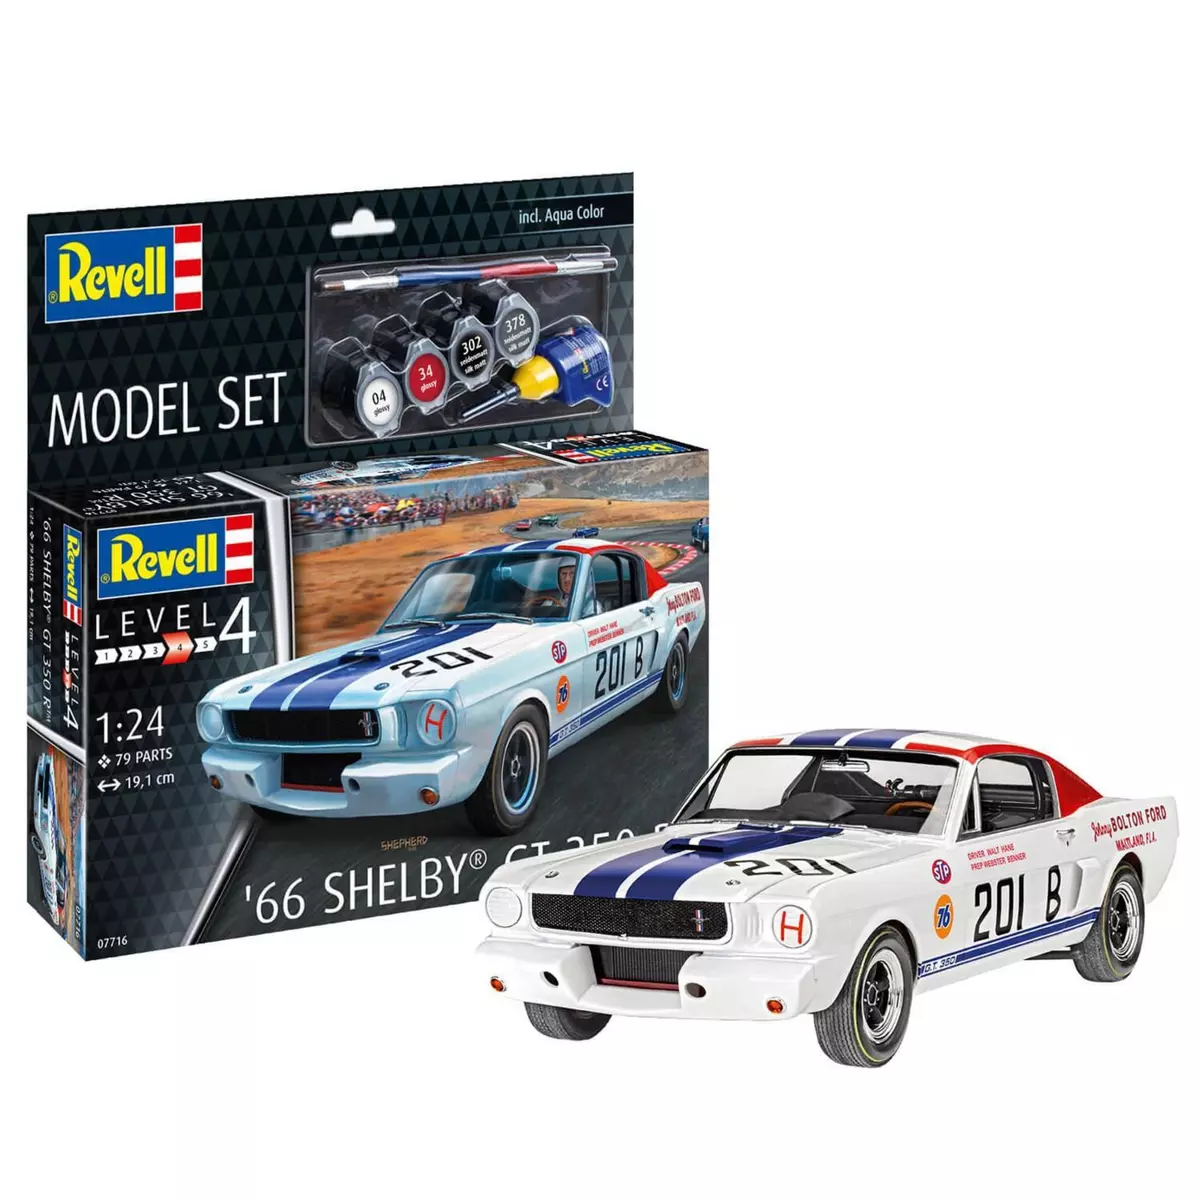 Revell Maquette voiture : Model Set : 1966 Shelby GT 350 R